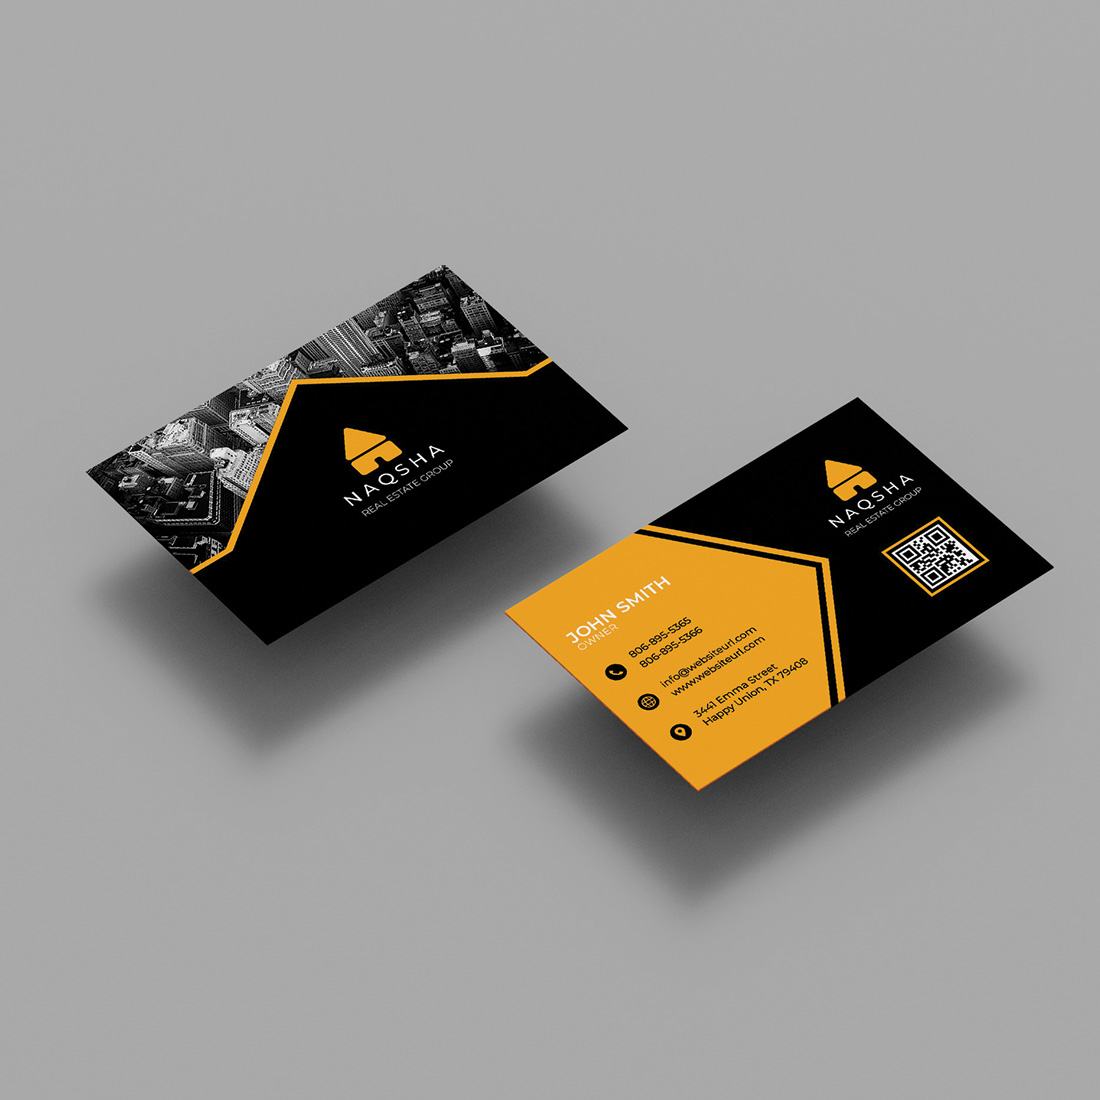 Image of amazing business card template in black yellow.